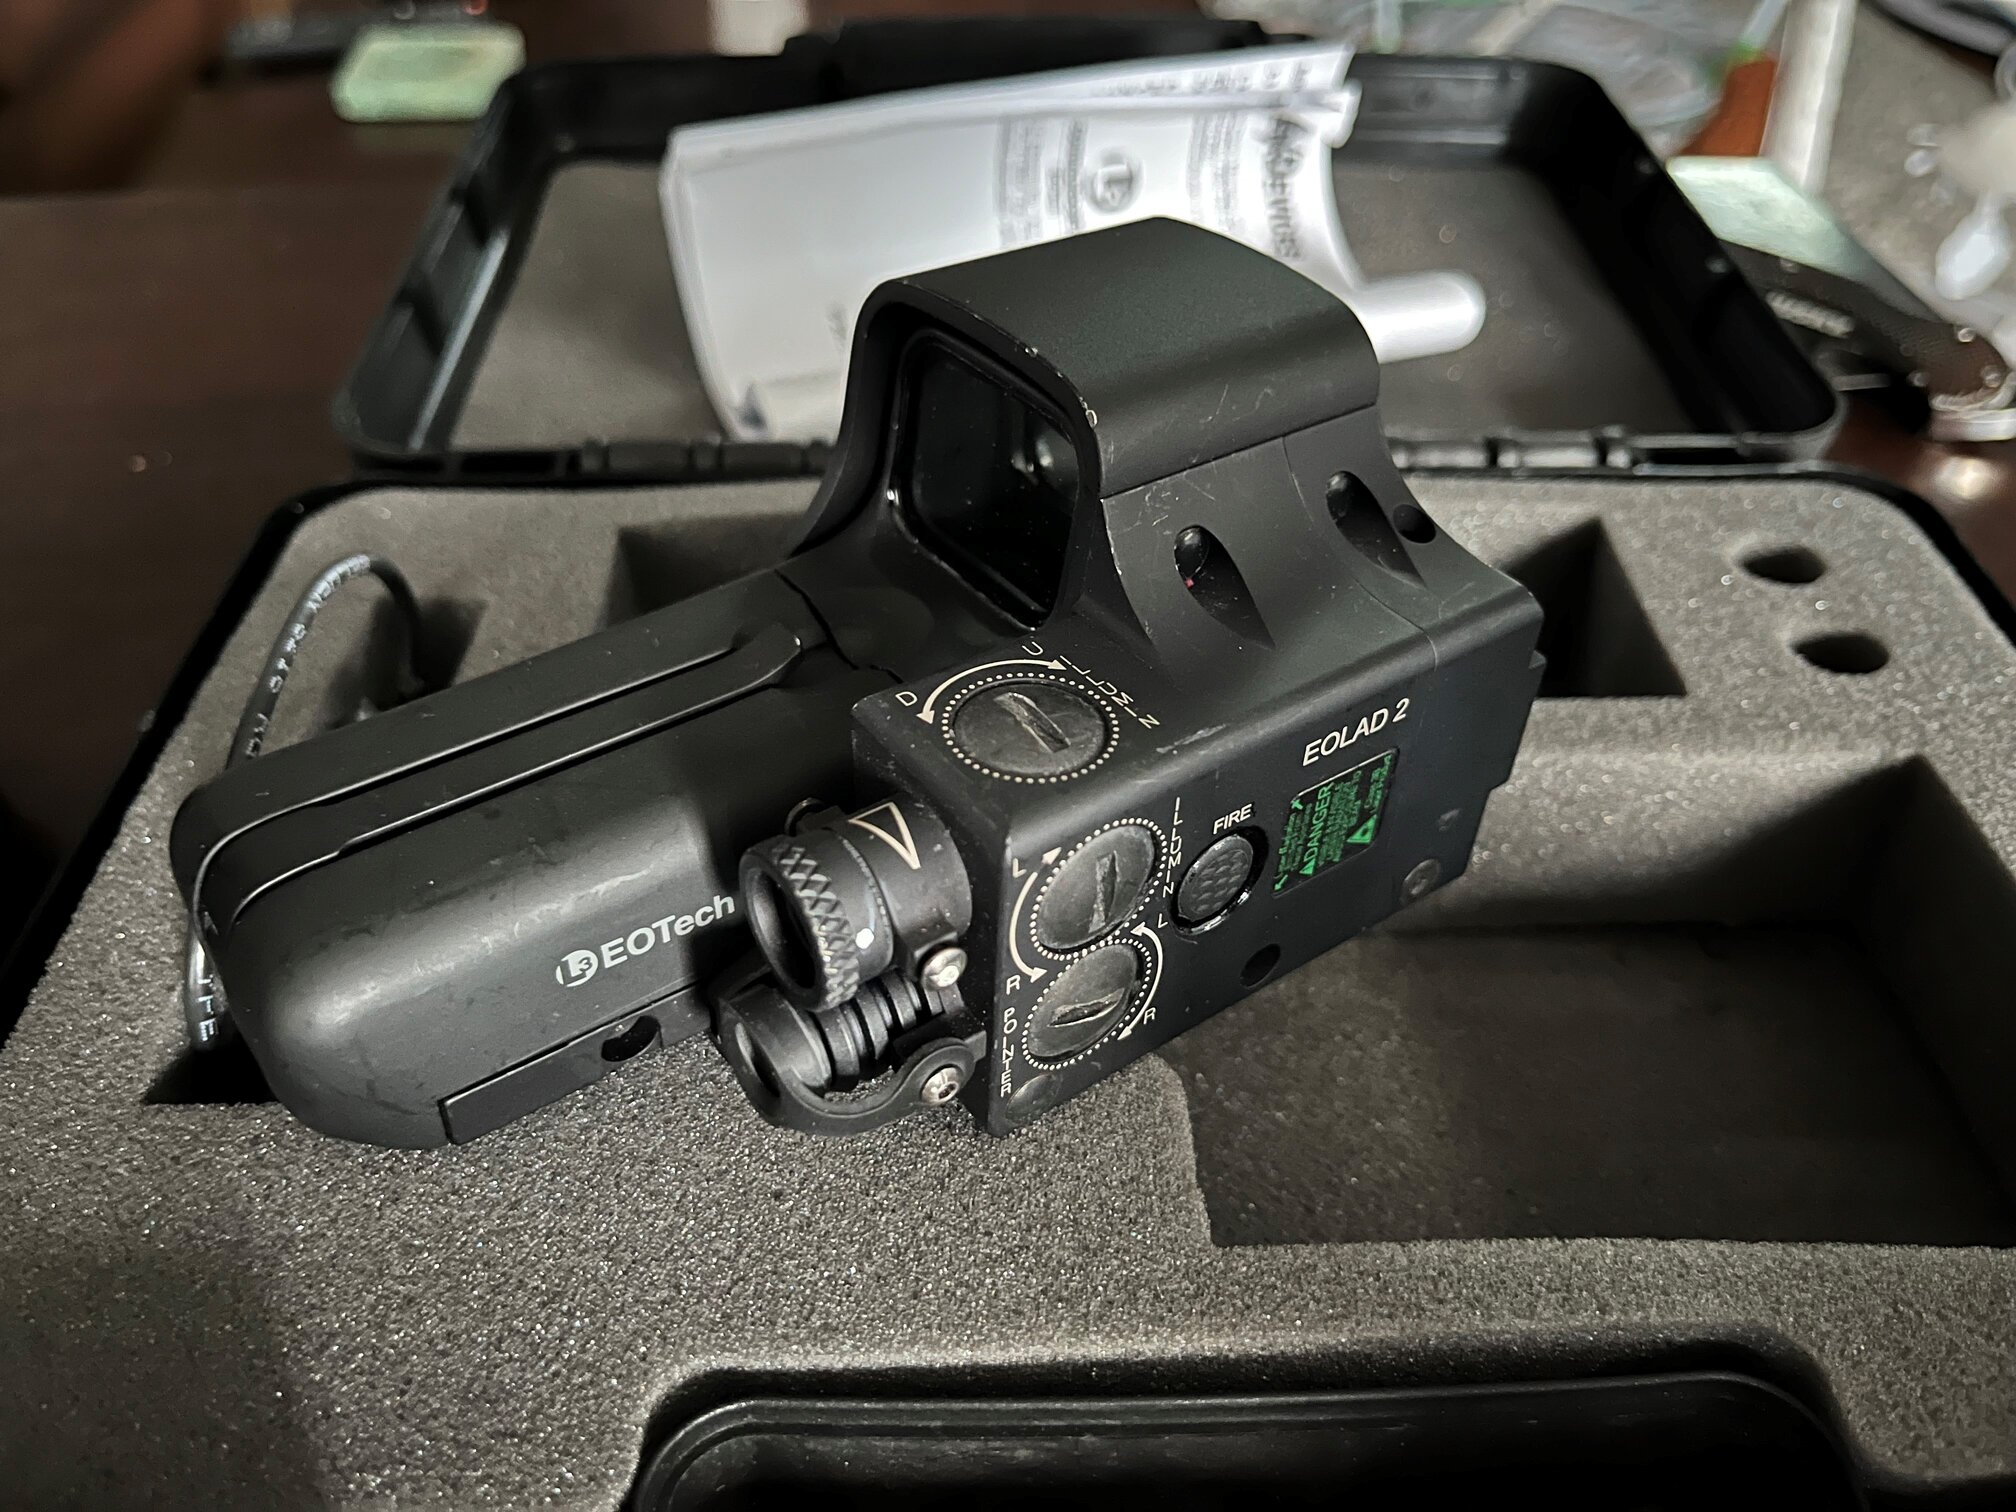 Eotech / Laser Devices Eolad 2 Weapon Holographic Sight - Click Image to Close